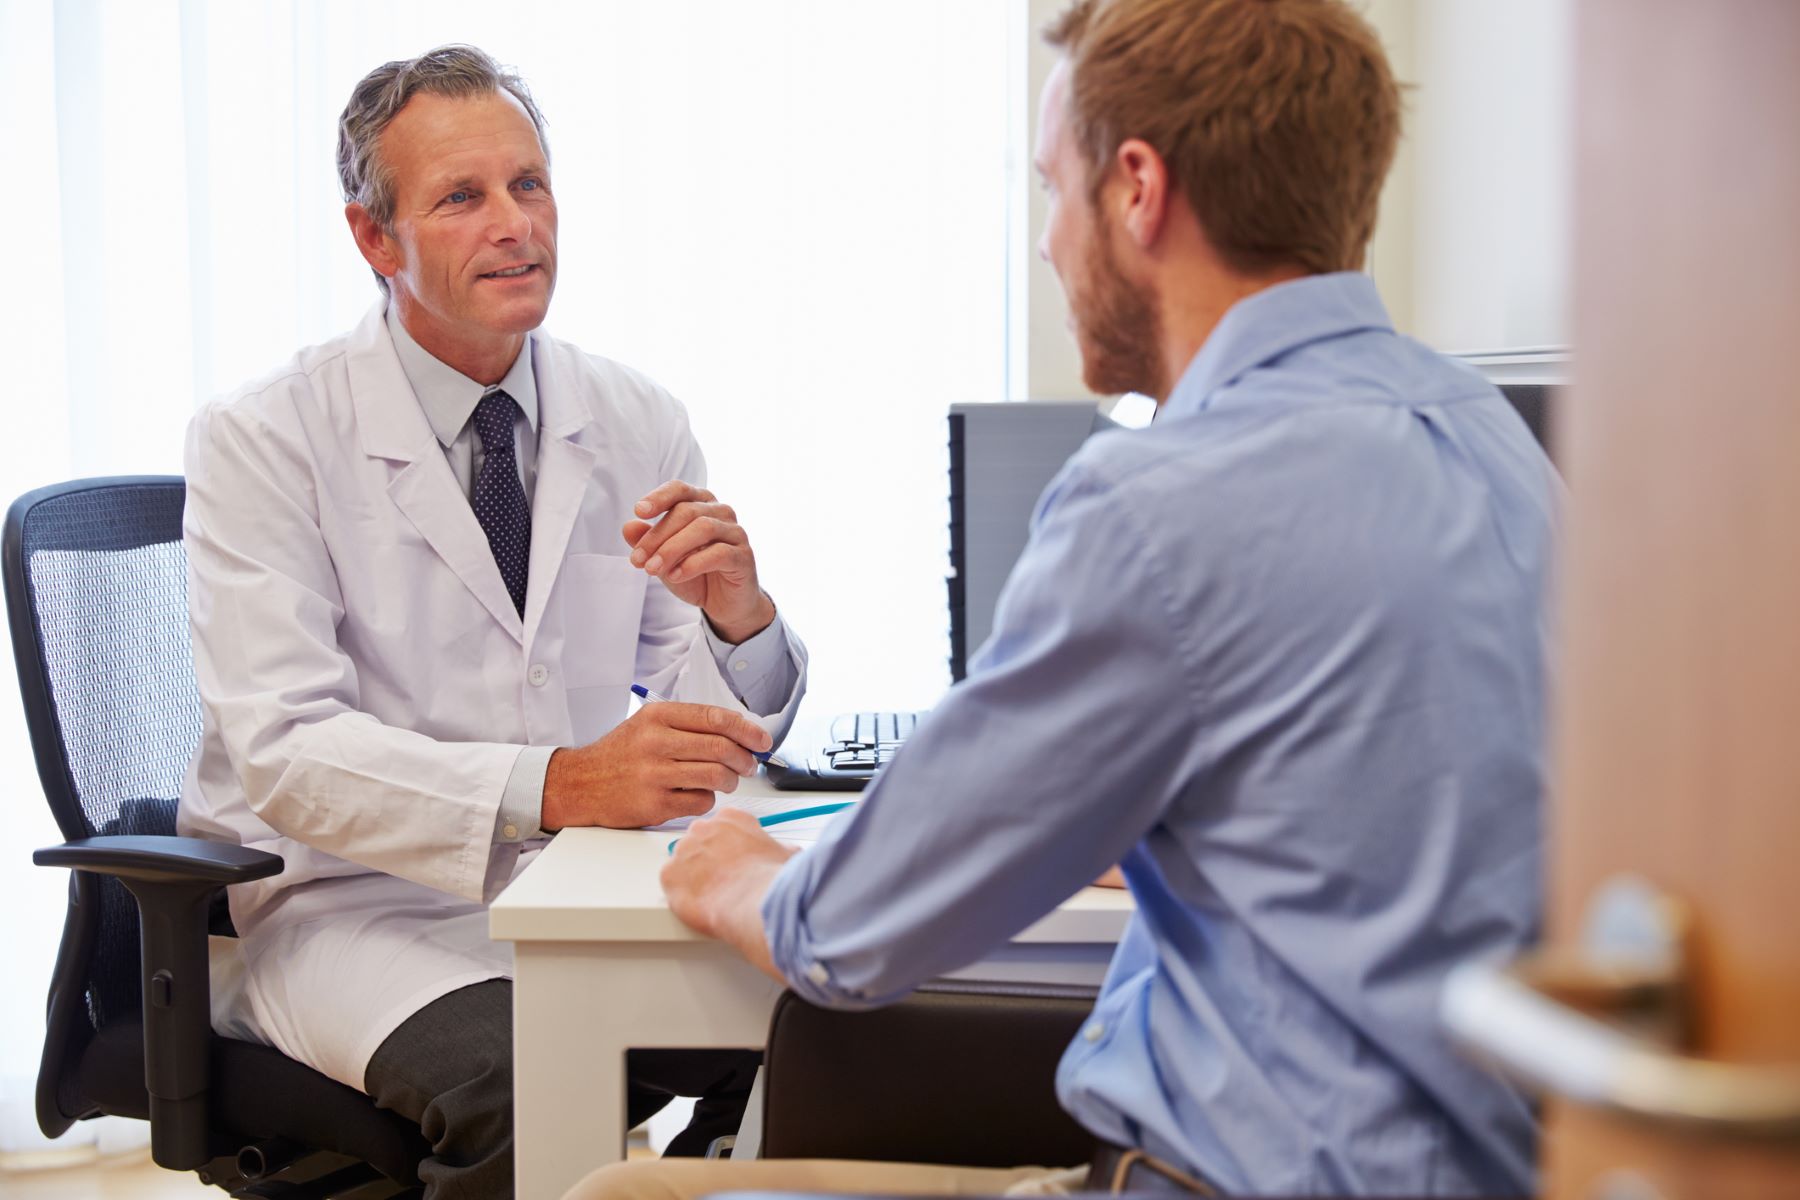 Male patient talking to a doctor in his office